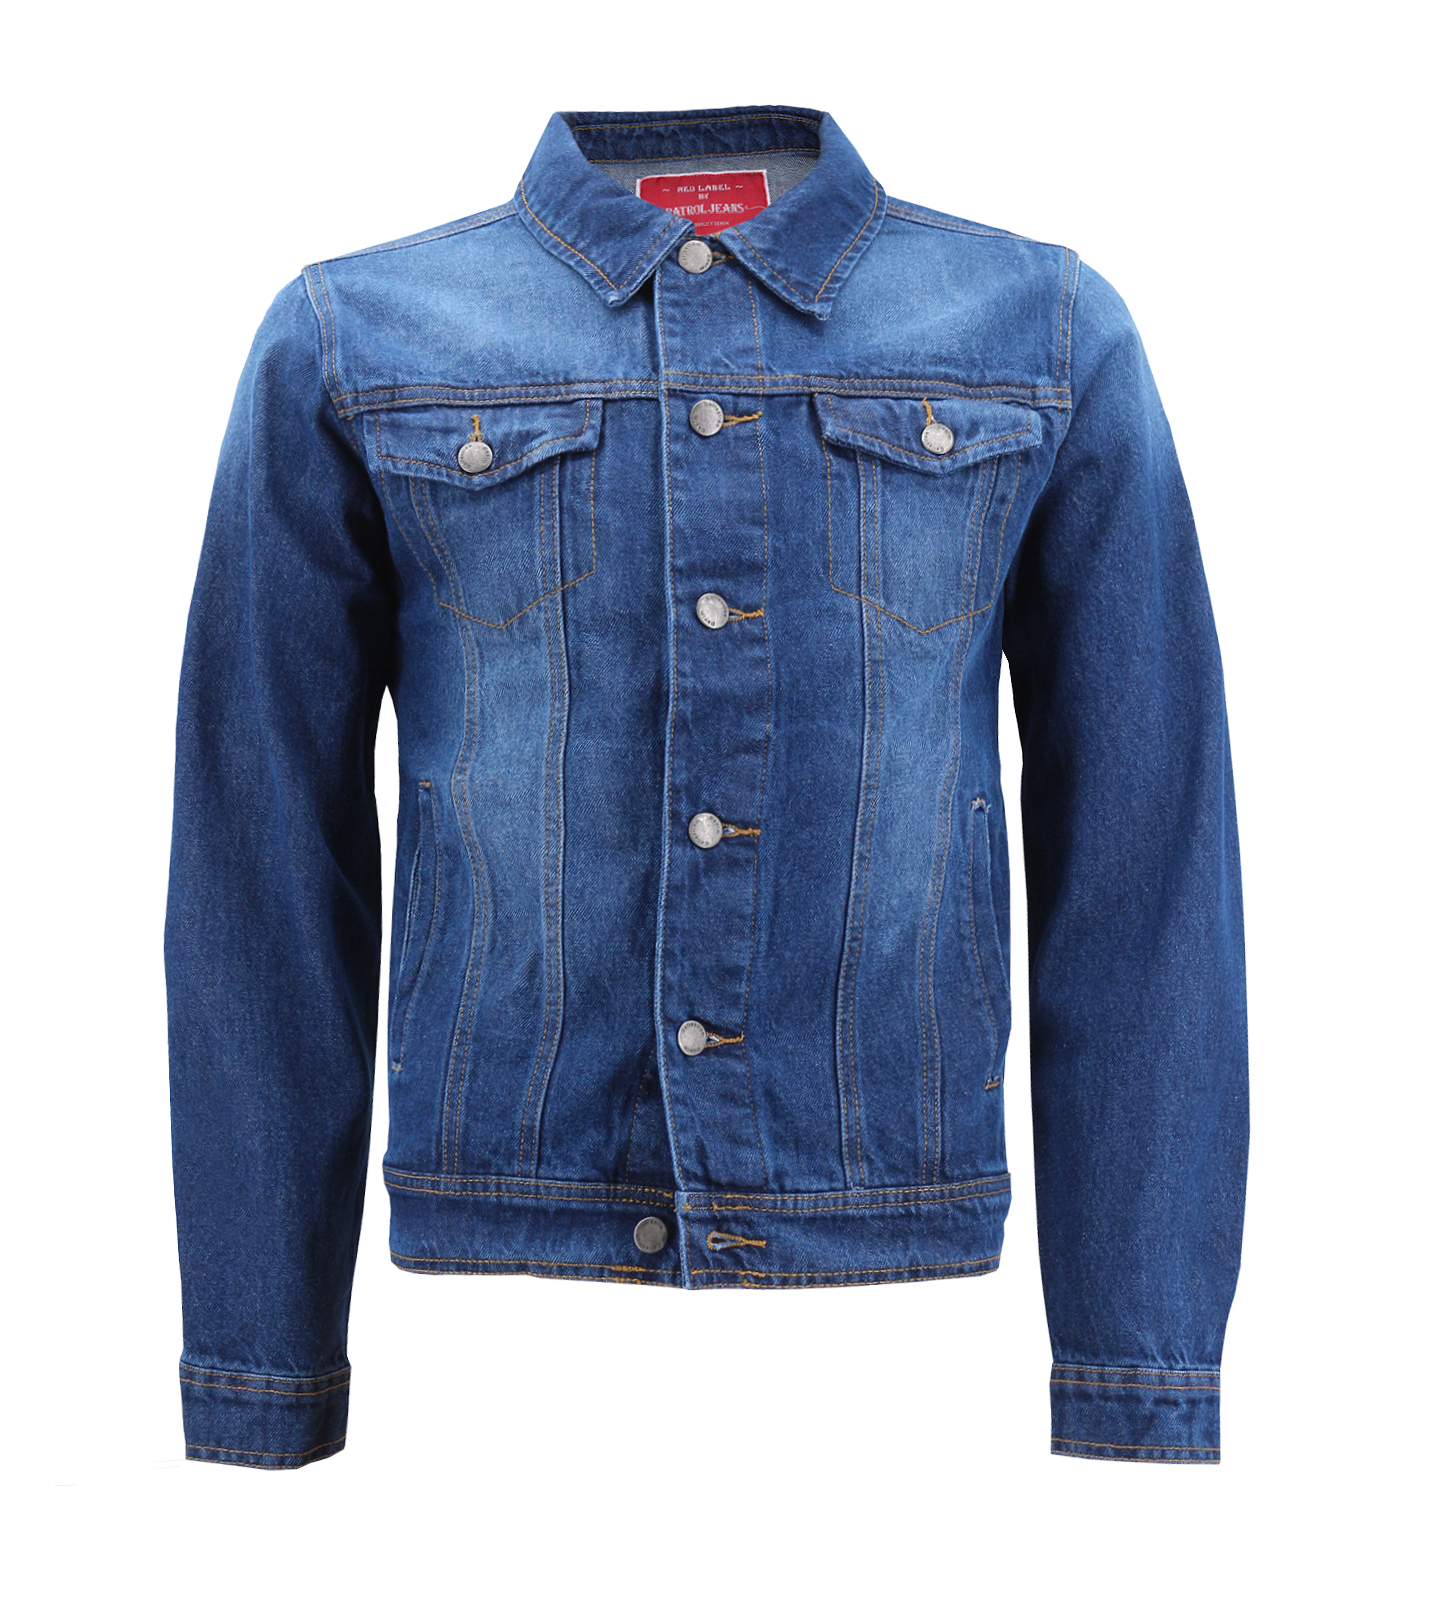 Red Label Men’s Premium Casual Faded Denim Jean Button Up Cotton Slim Fit Jacket (Solid Dark Blue, XL) - image 1 of 3